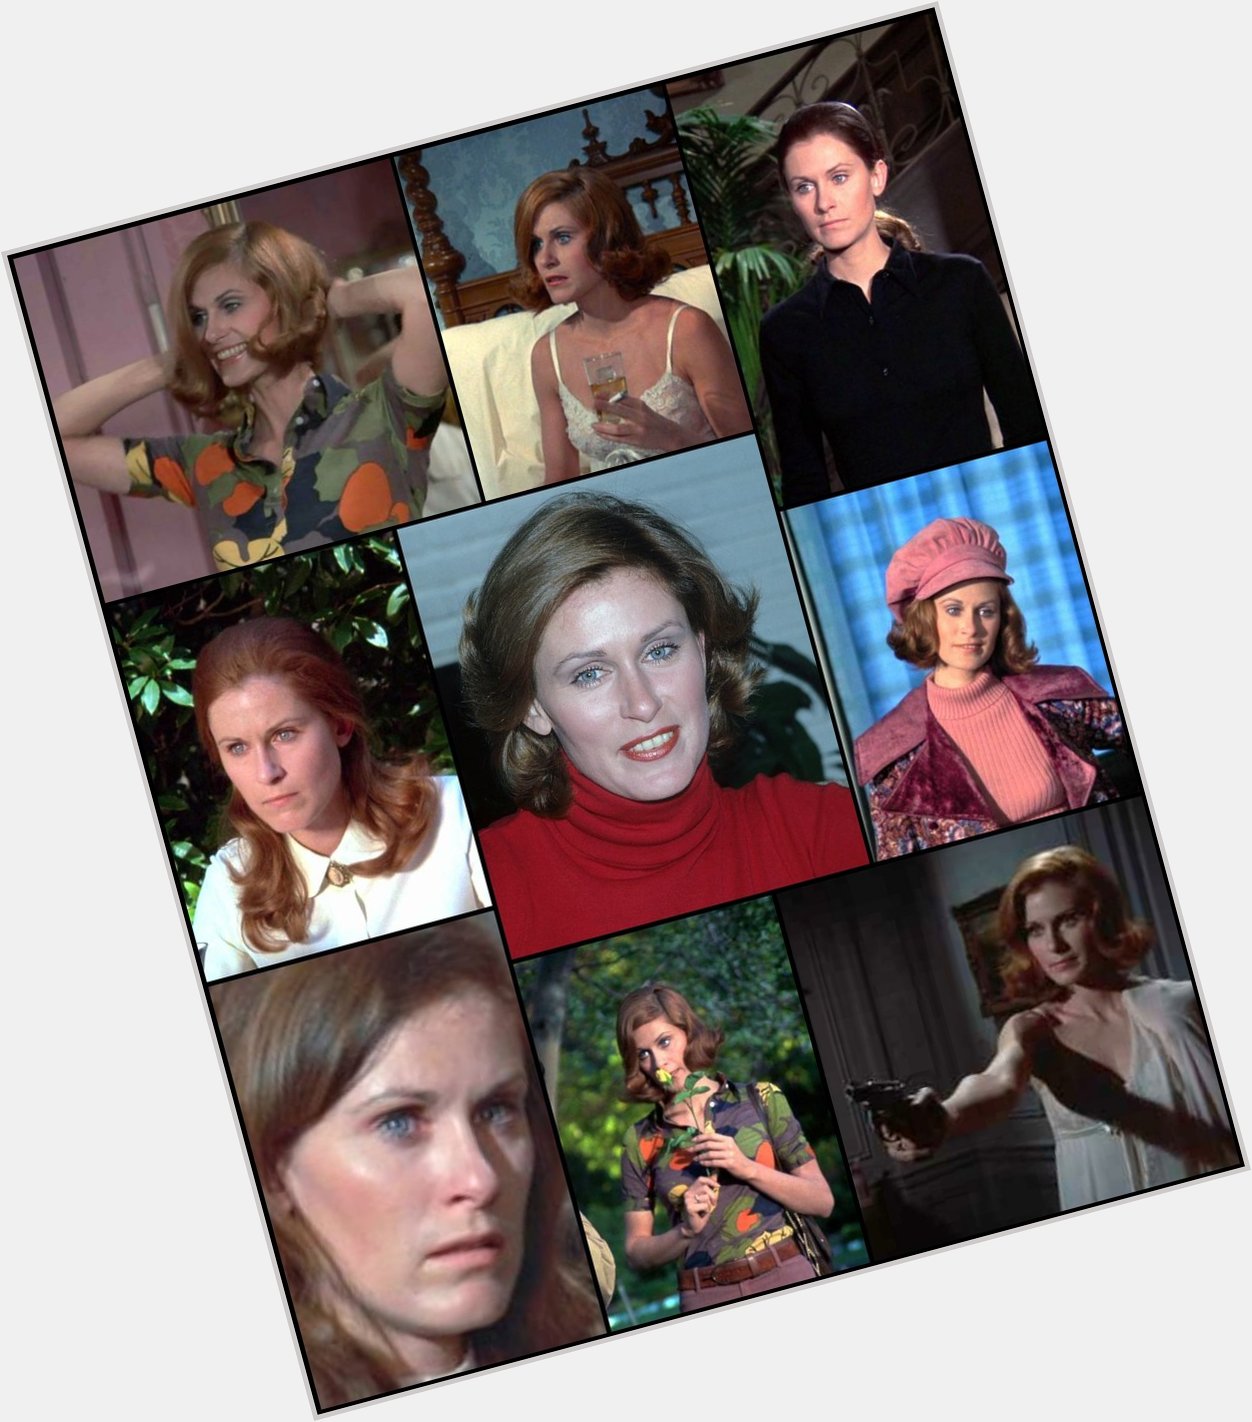 Happy Birthday Beth Chadwick herself

Susan Clark is 78 today (March 8th) 